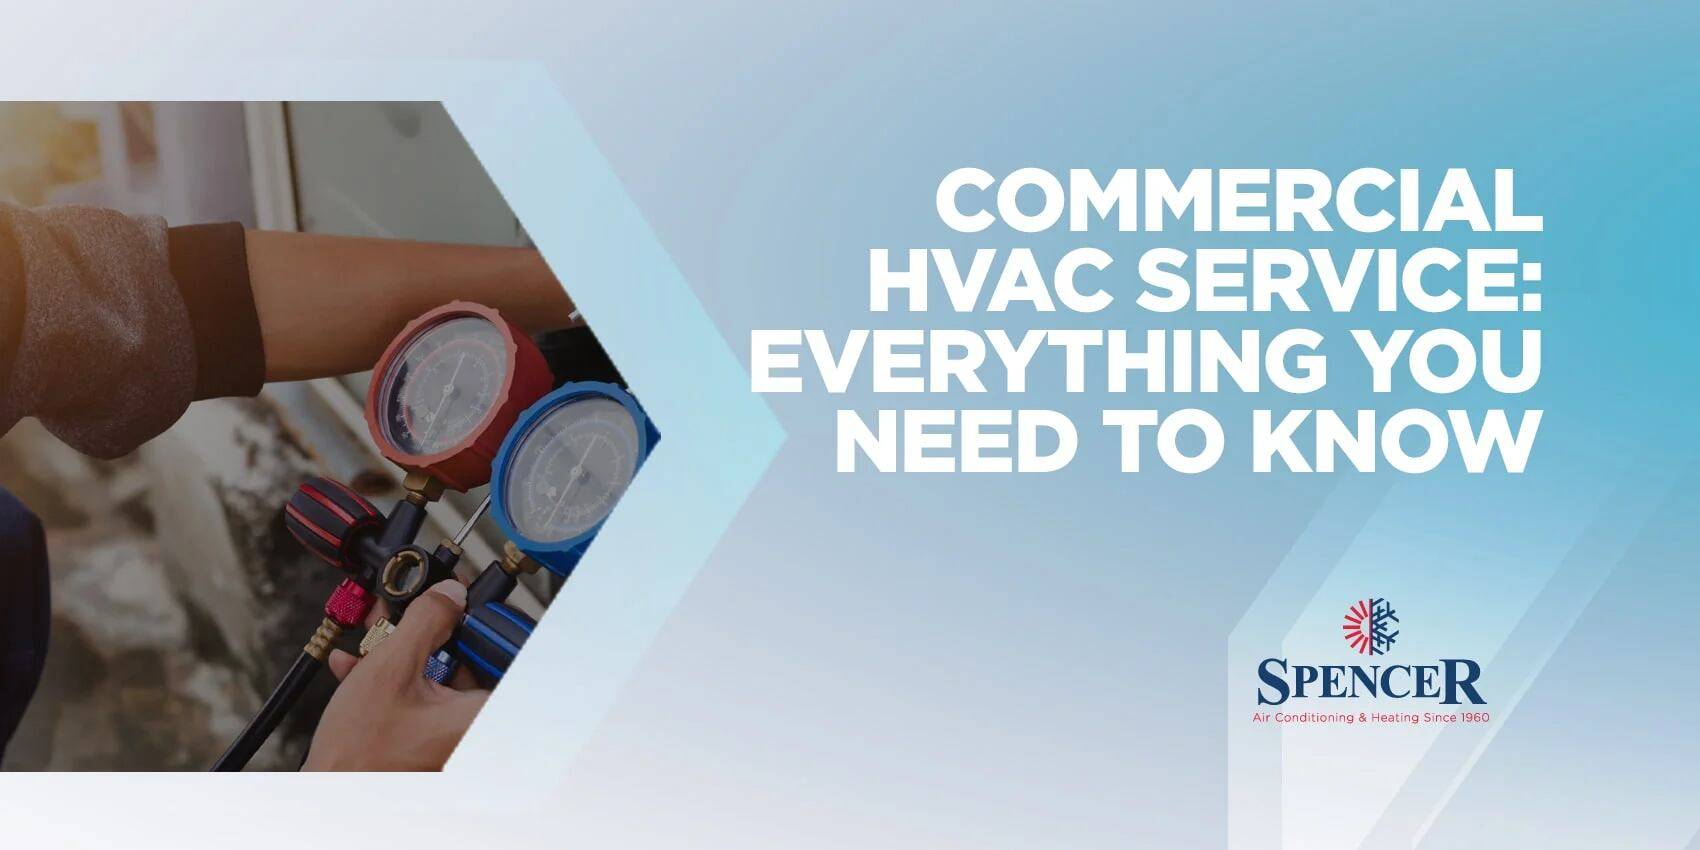 spencer commercial HVAC service: everything you need to know Irving, TX